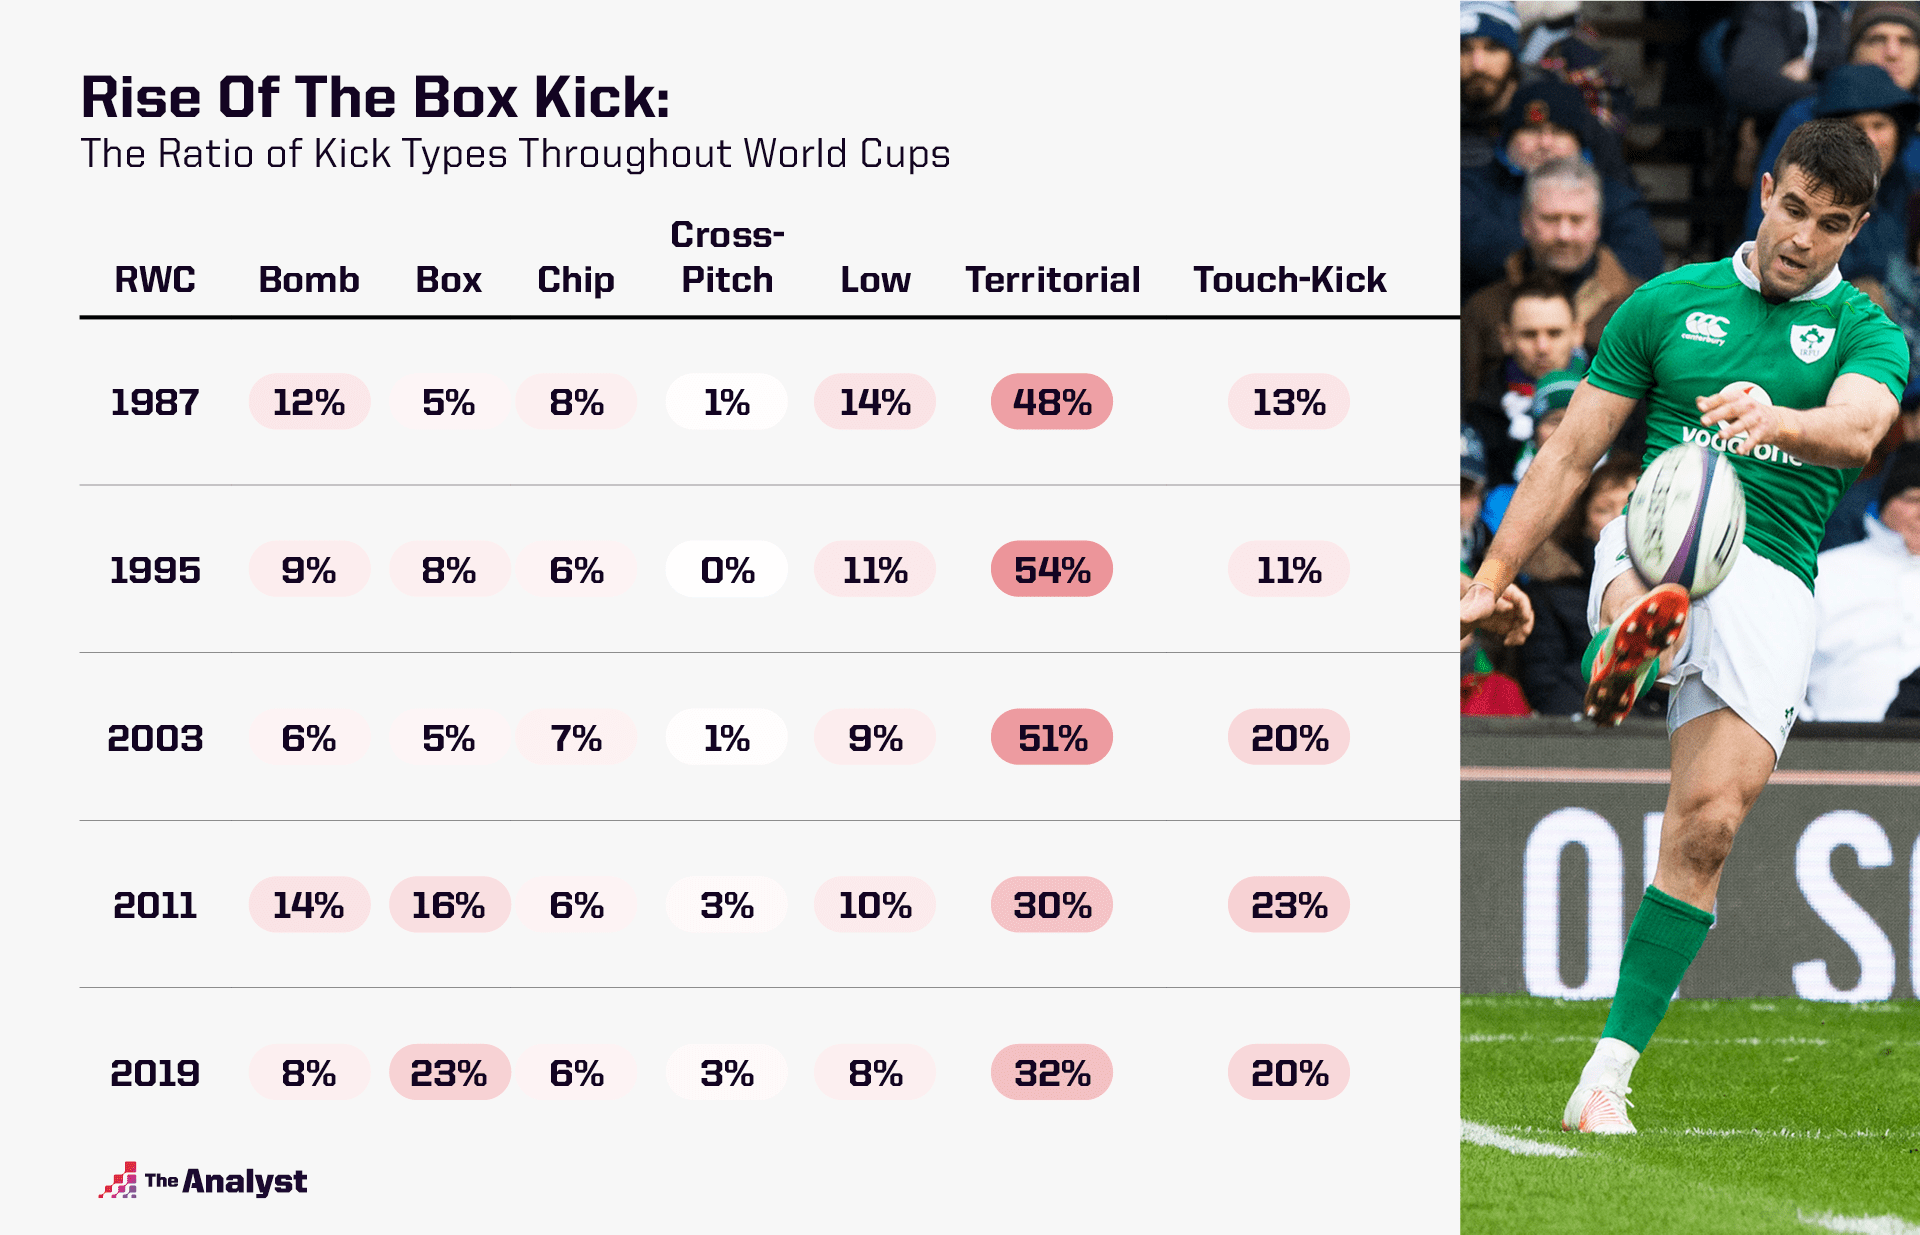 How rugby kicking has changed over time